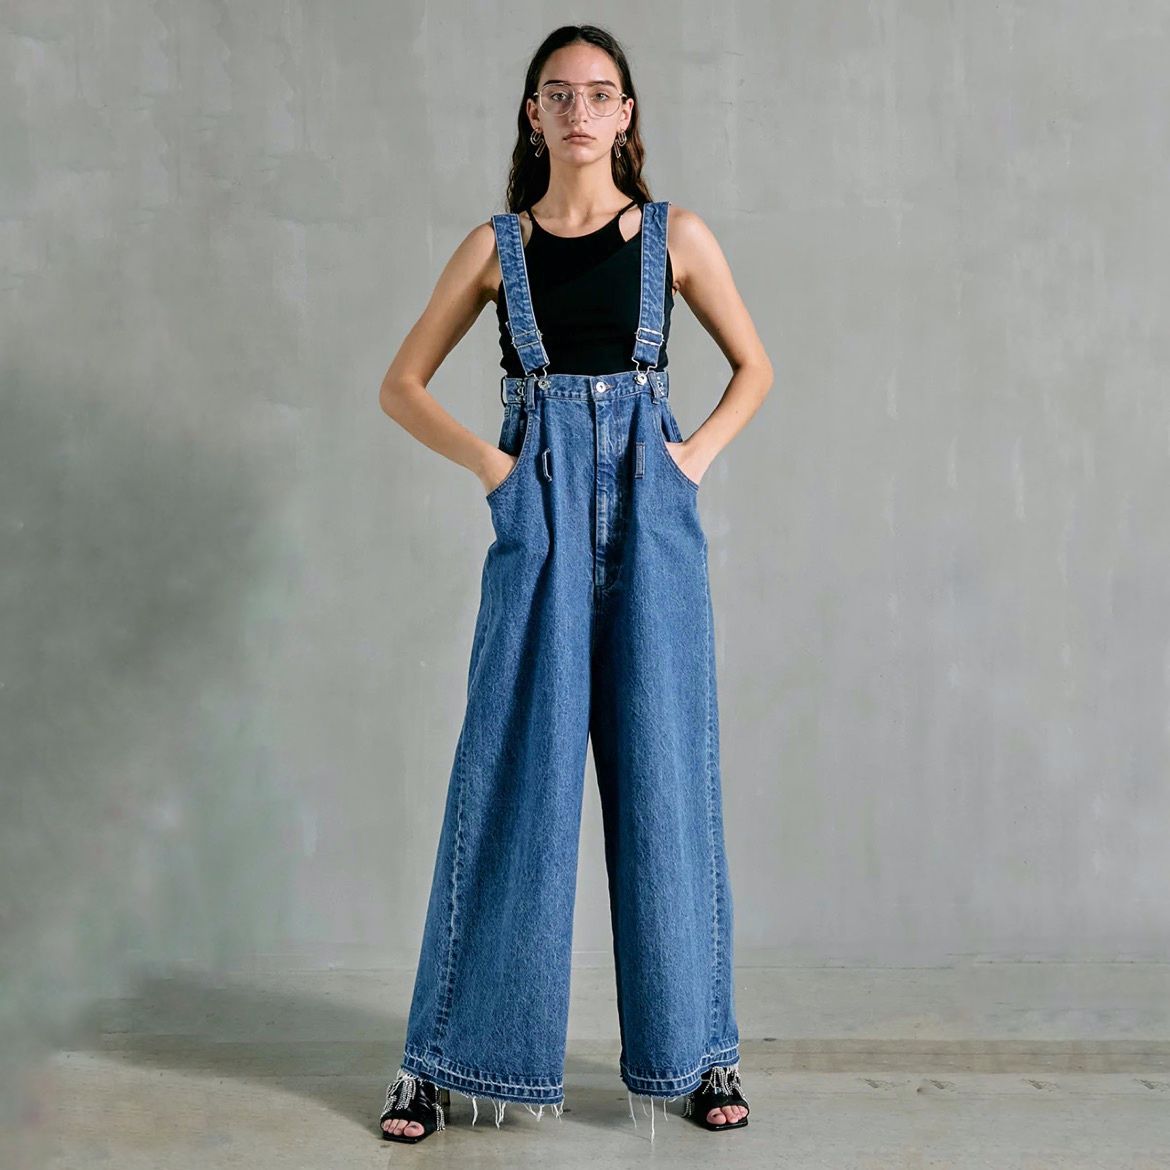 L'Appartement Raw+SUEDE OVERALLS オールインワン